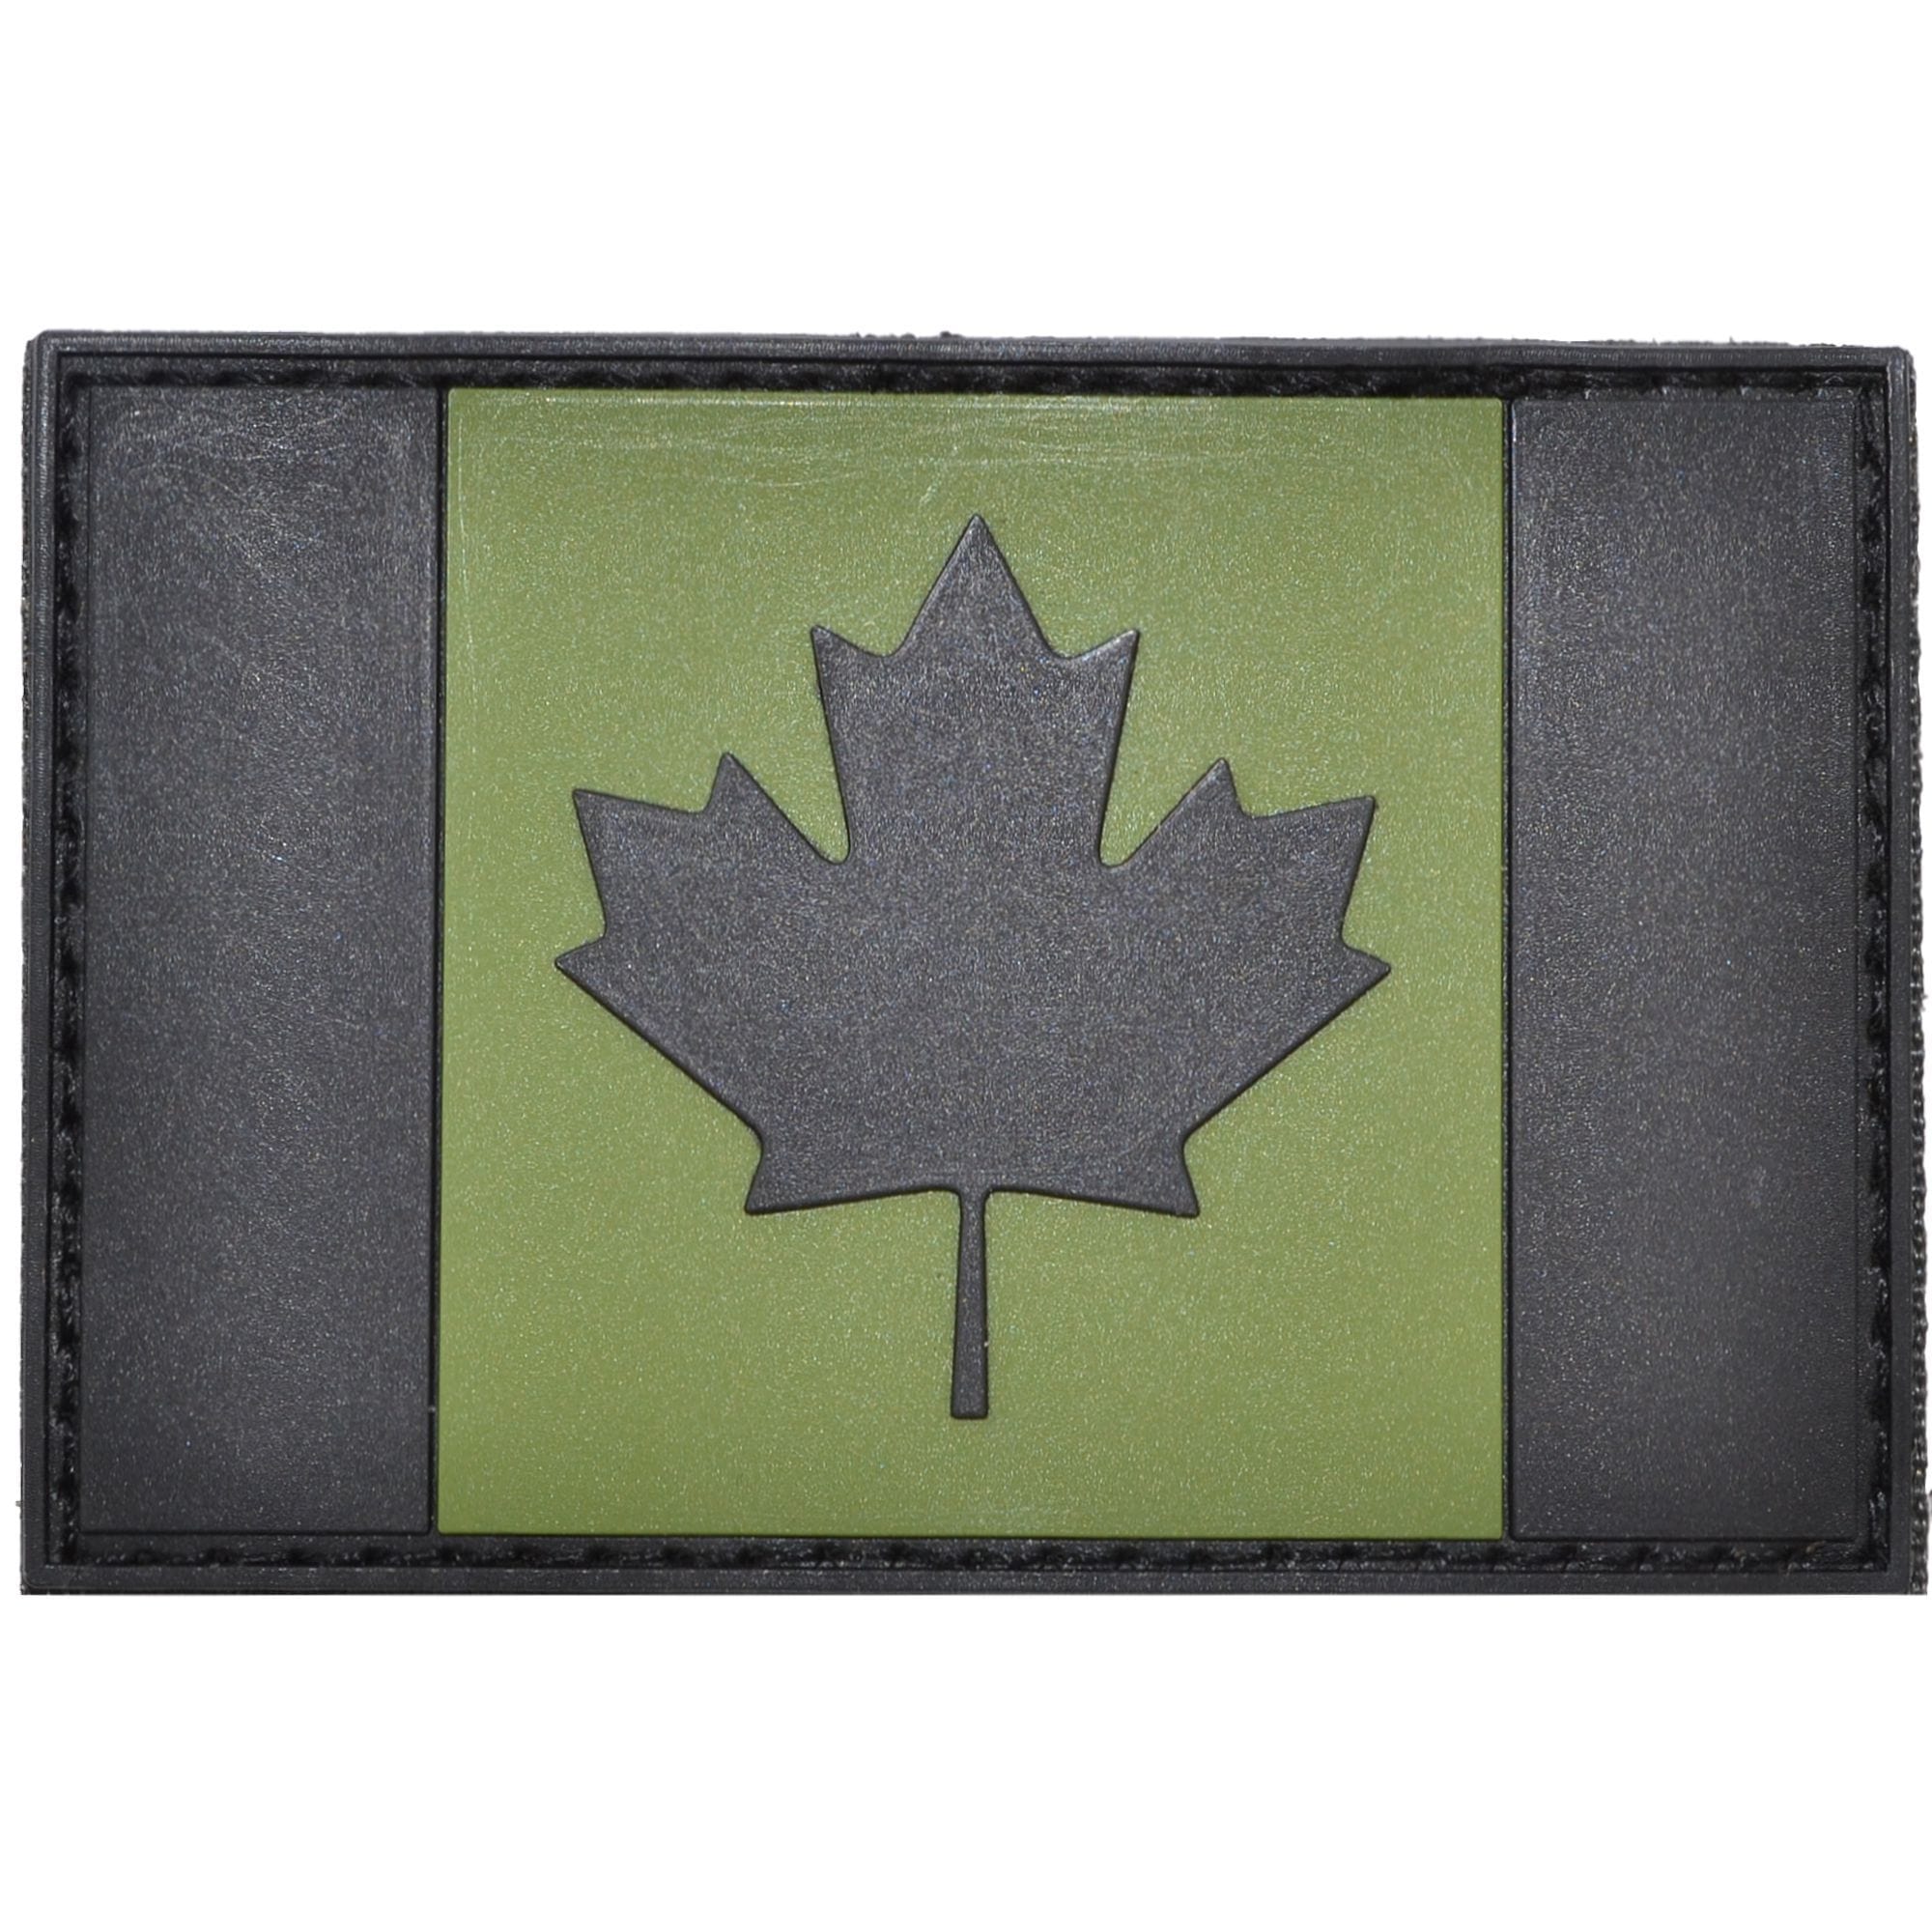 Tactical Gear Junkie Patches Tactical Green Canadian Flag Full Color - 2x3 PVC Patch